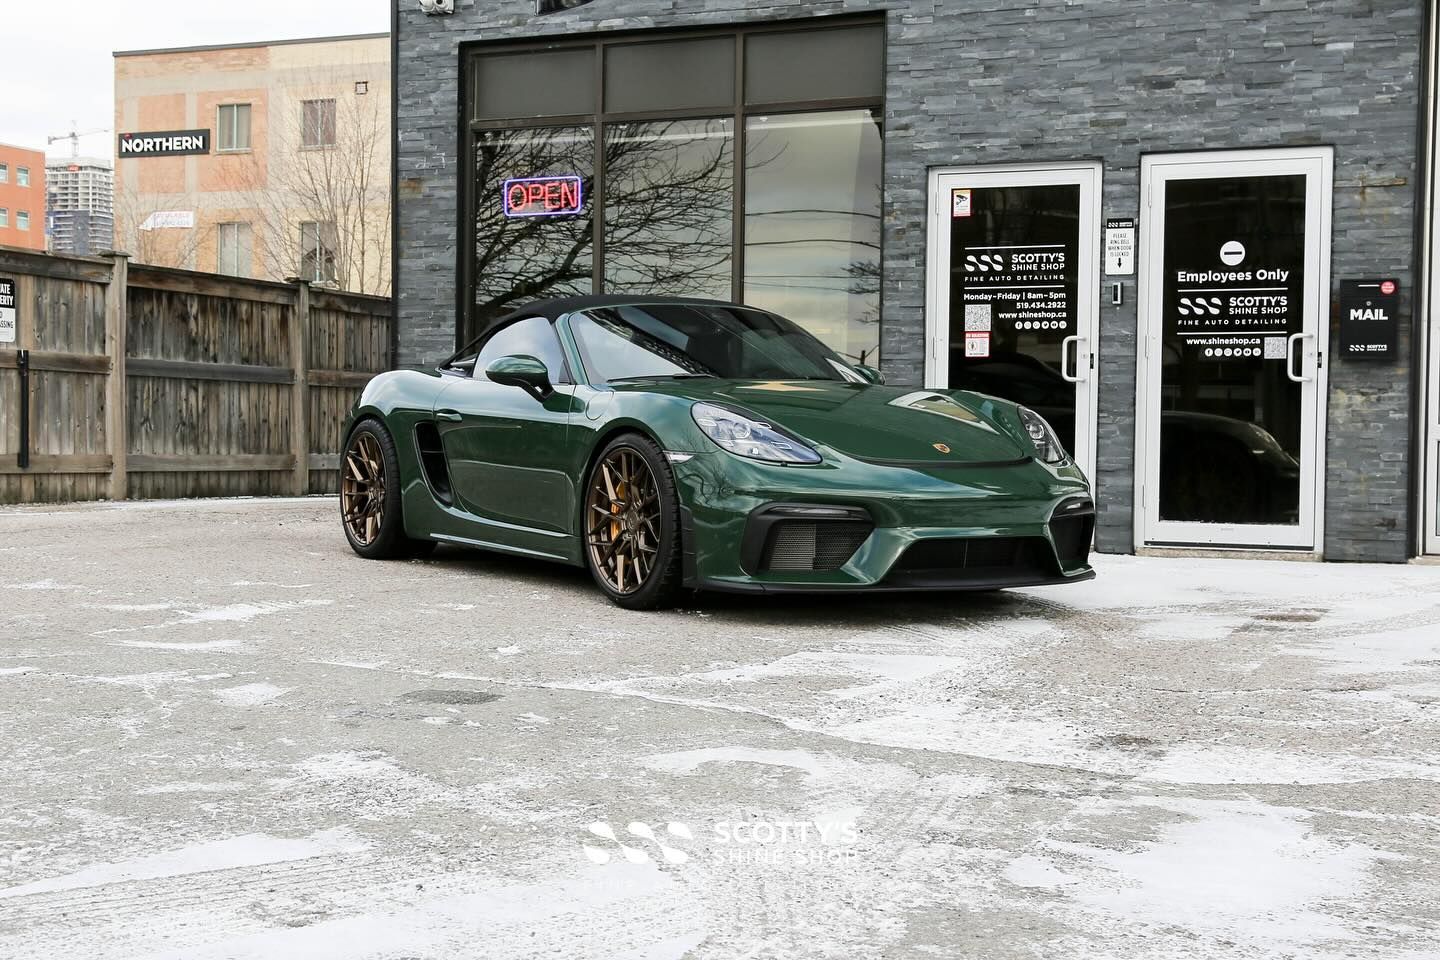 2021 Porsche 718 Spyder Xpel Ultimate Plus 10 mil PPF, Xpel Prime XR Plus Window Tint, Xpel Fusion Premium Ceramic Coating, Xpel Fusion Wheel/Caliper and Glass All Coated front end view London, Ontario CAN